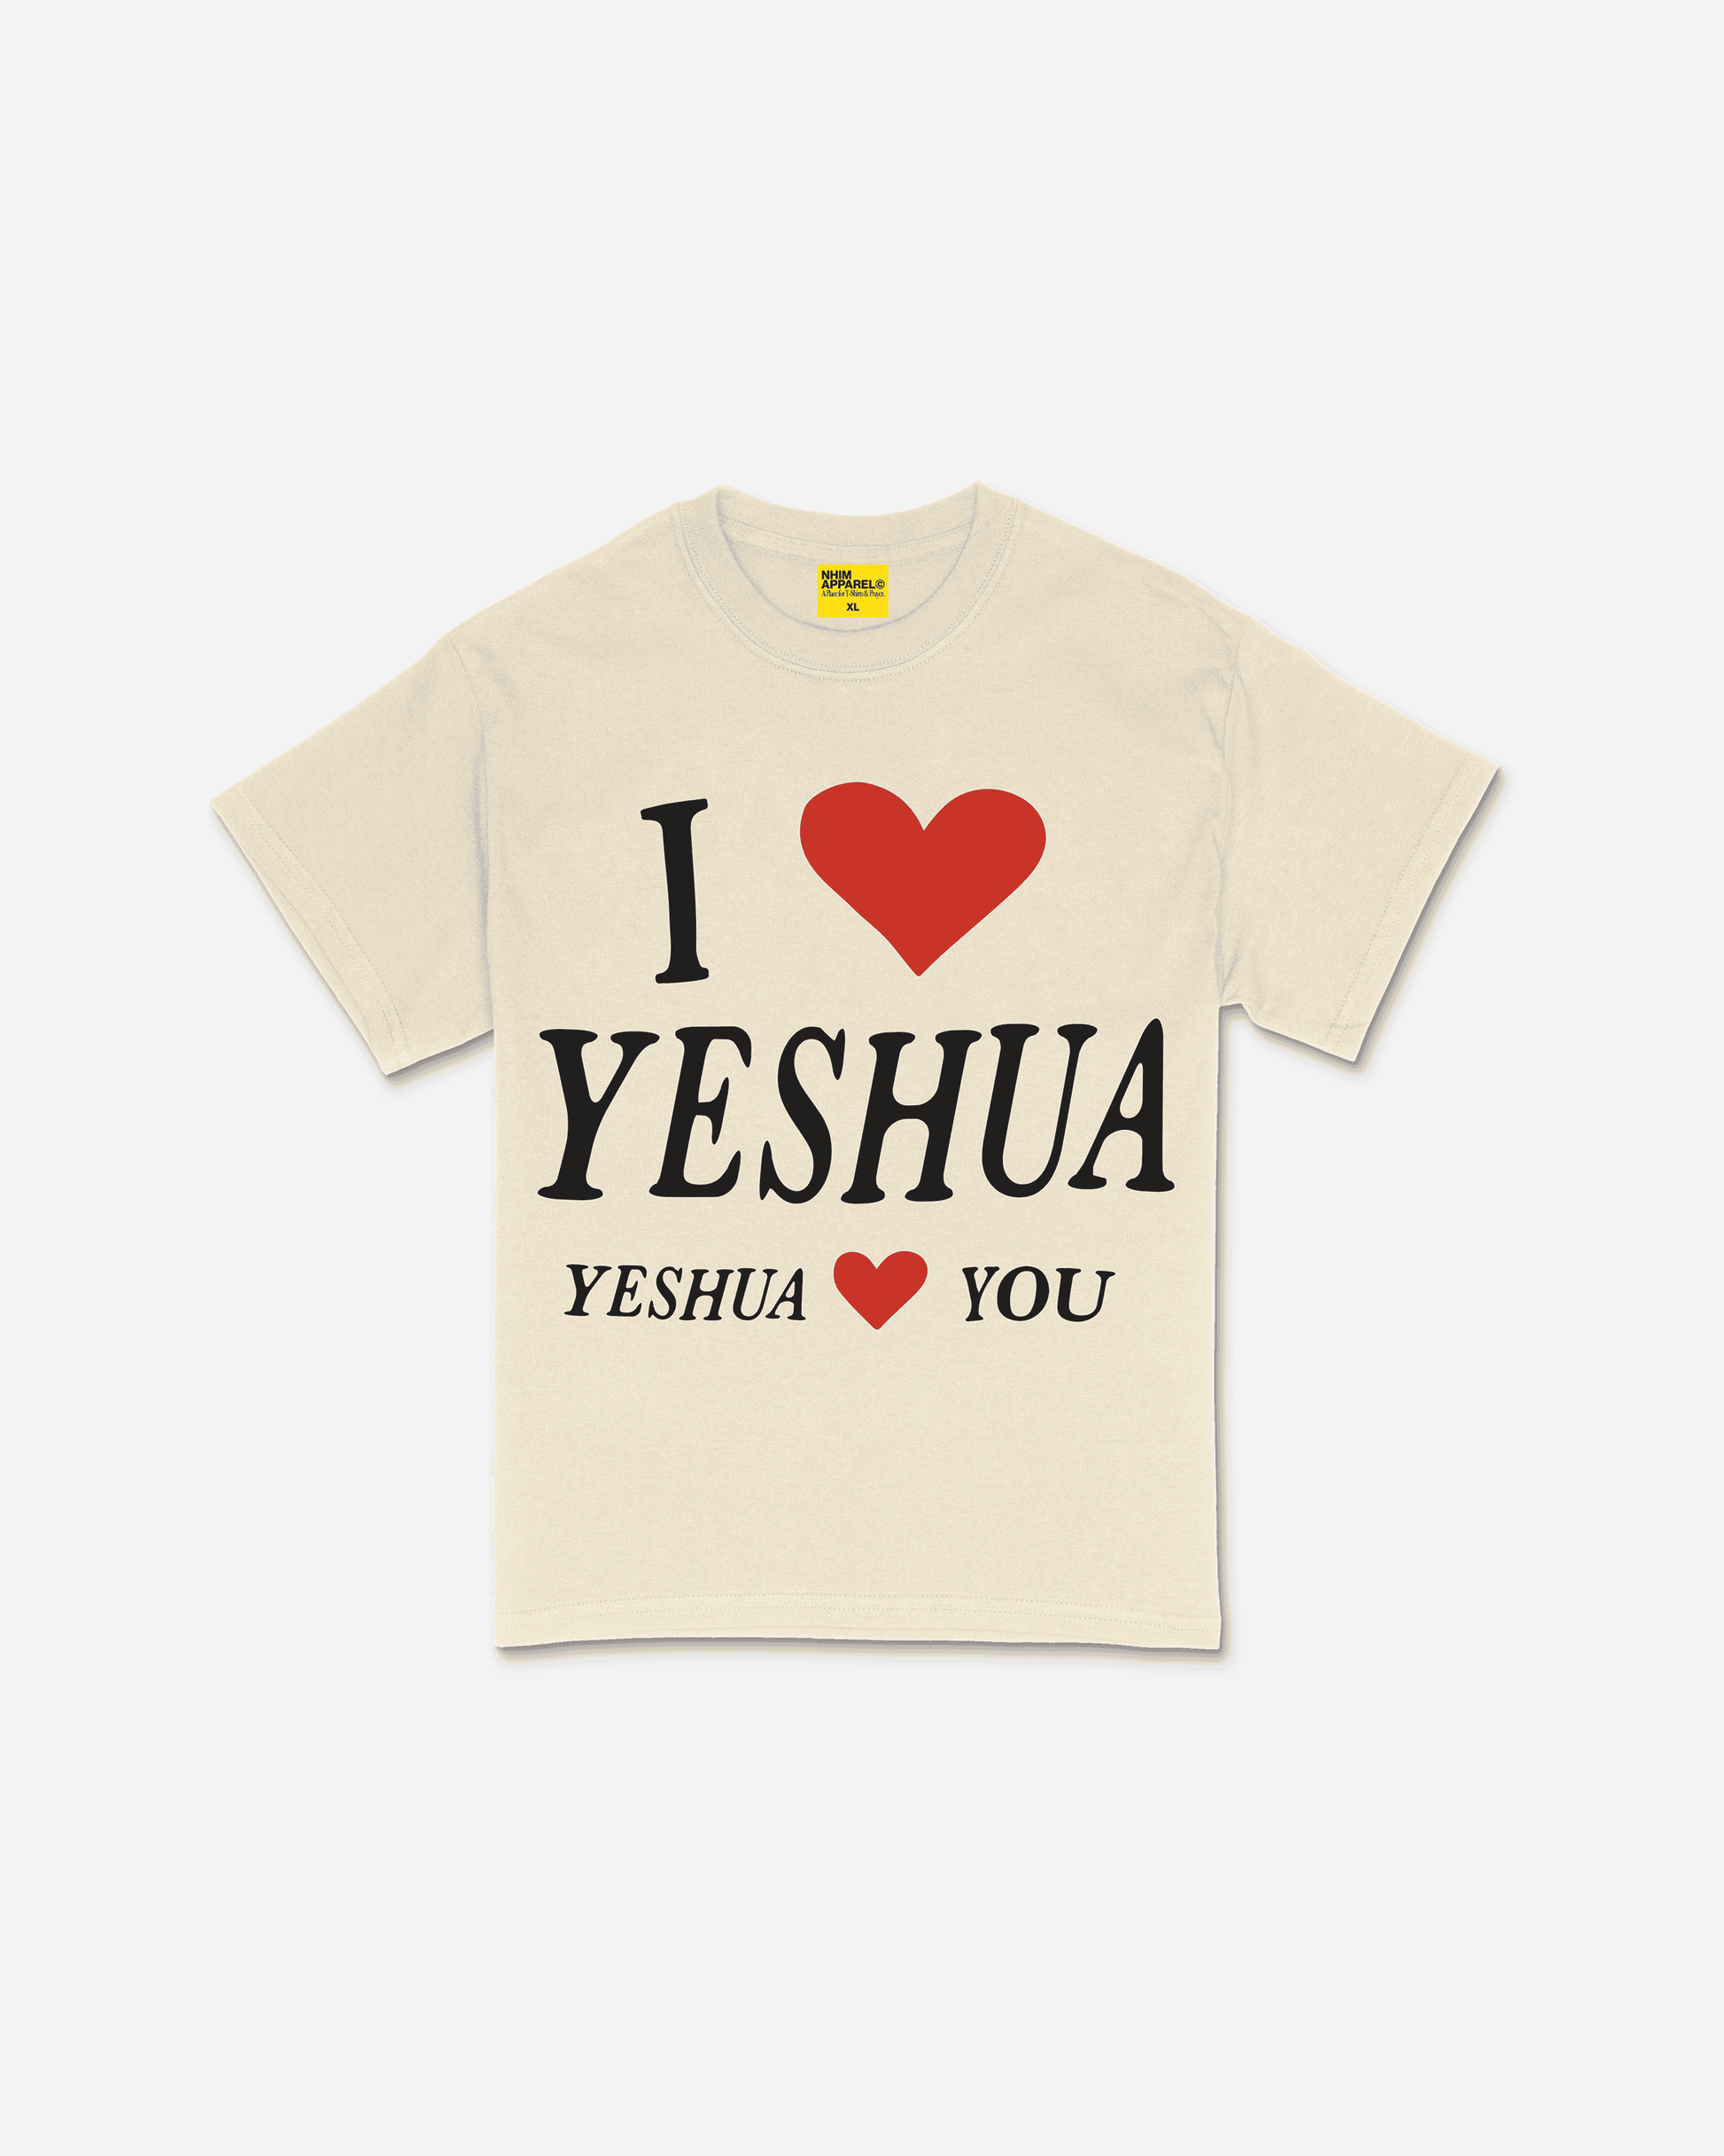 I Love Yeshua loves you t-shirt from the WWYD (What Would Yeshua Do) collection. Christian shirts from NHIM Apparel. All glory to Yeshua!